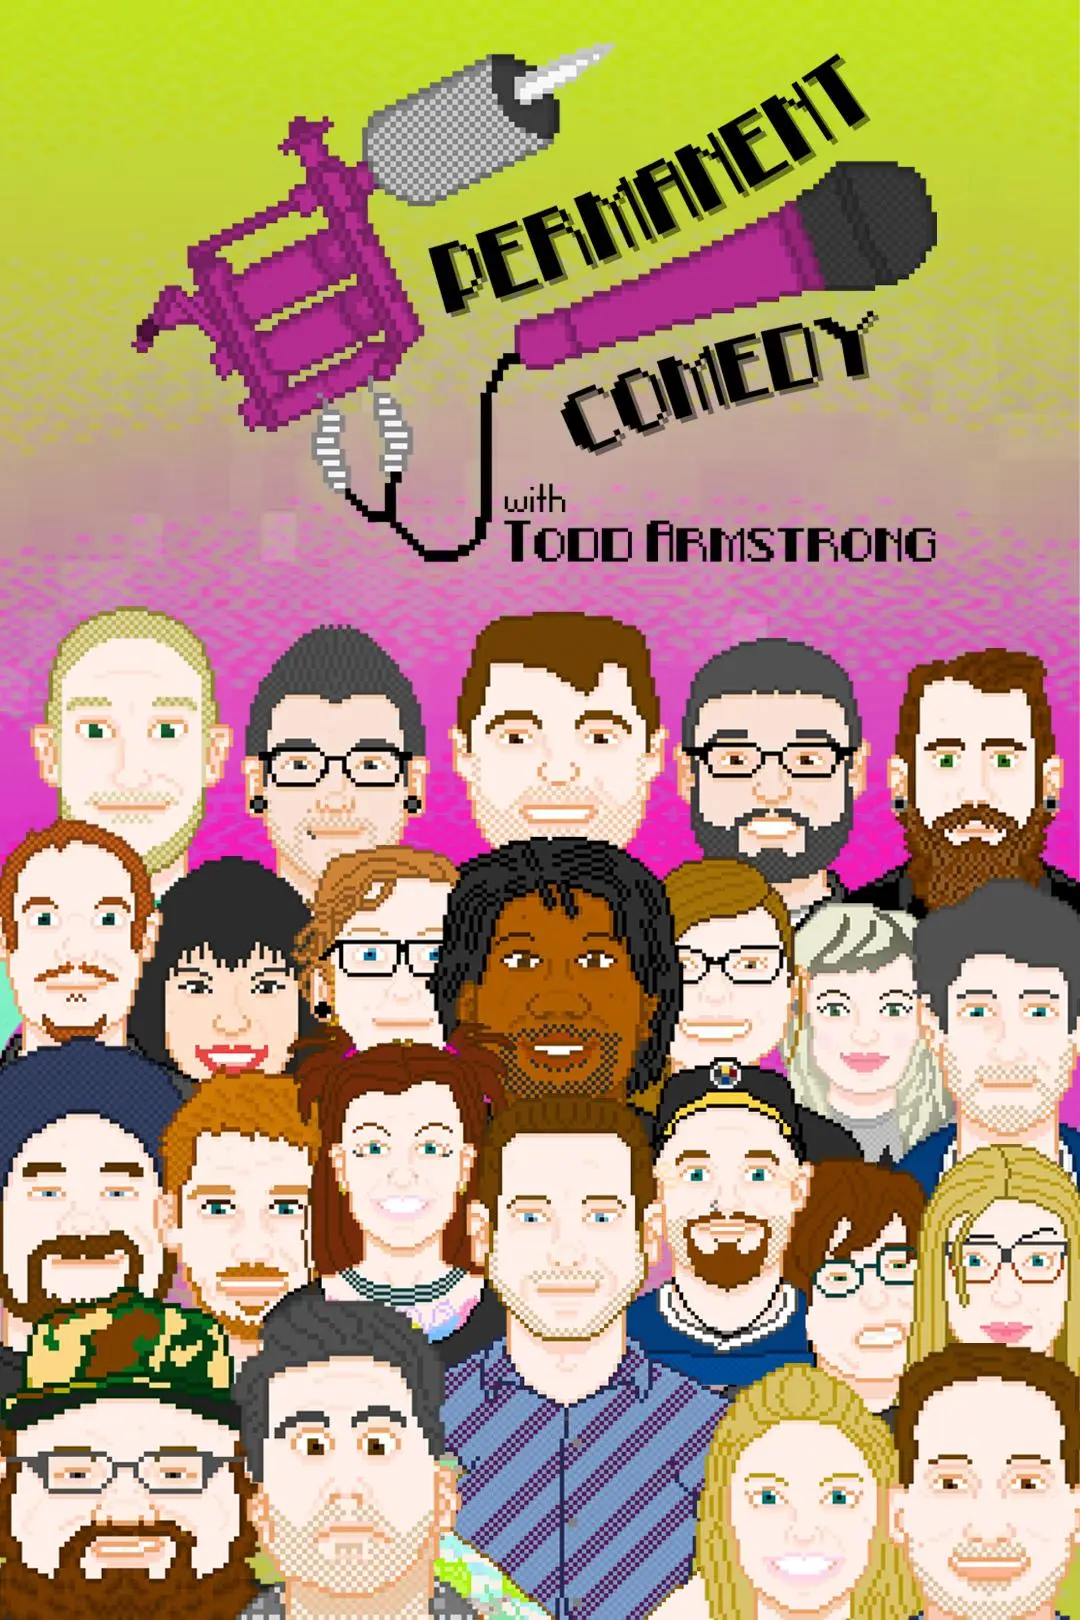 Permanent Comedy with Todd Armstrong_peliplat